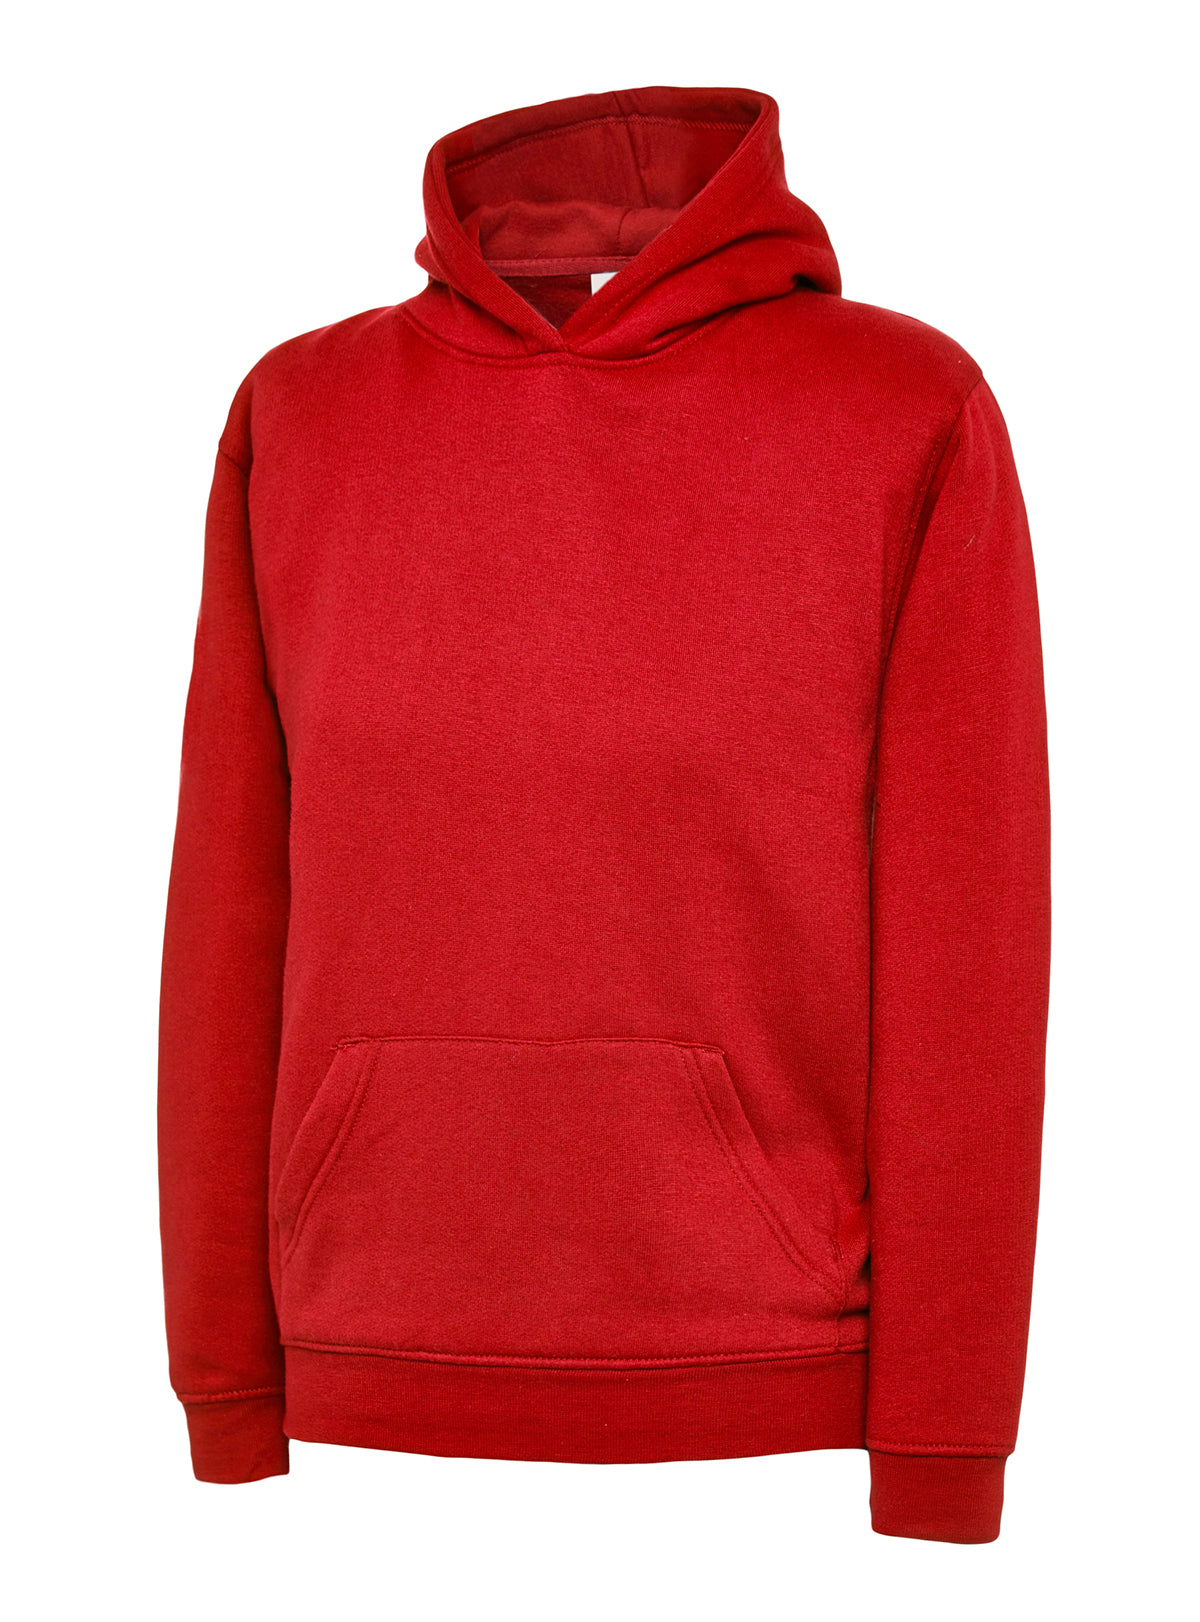 the_ux_childrens_hooded_sweatshirt_red